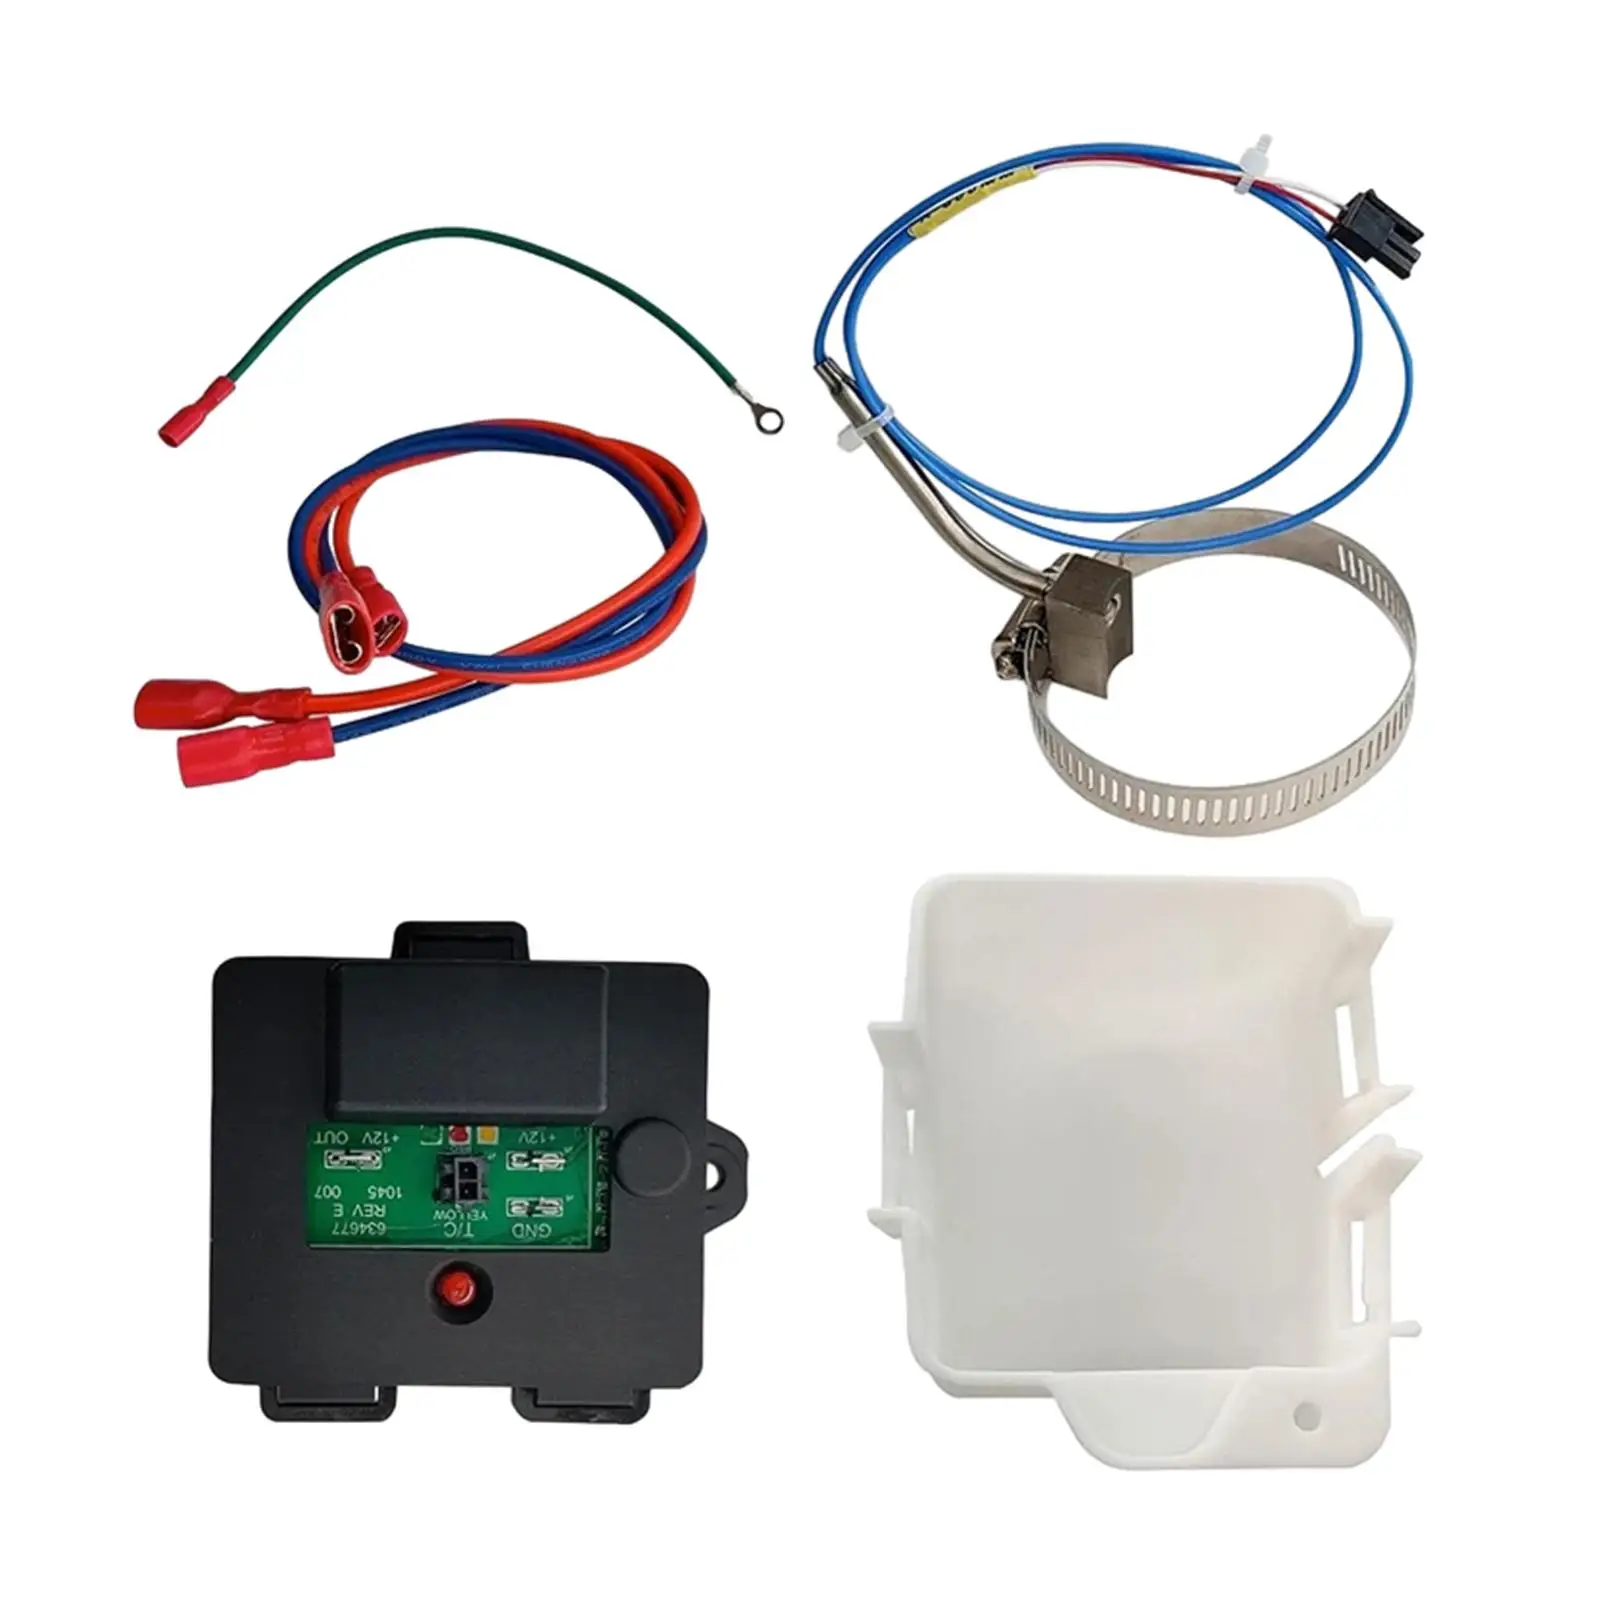 637360 Temp Monitor Control Kits Replacement Parts Professional Cooling Control Kits for 2118-1210 Restaurant Hotel Industrial